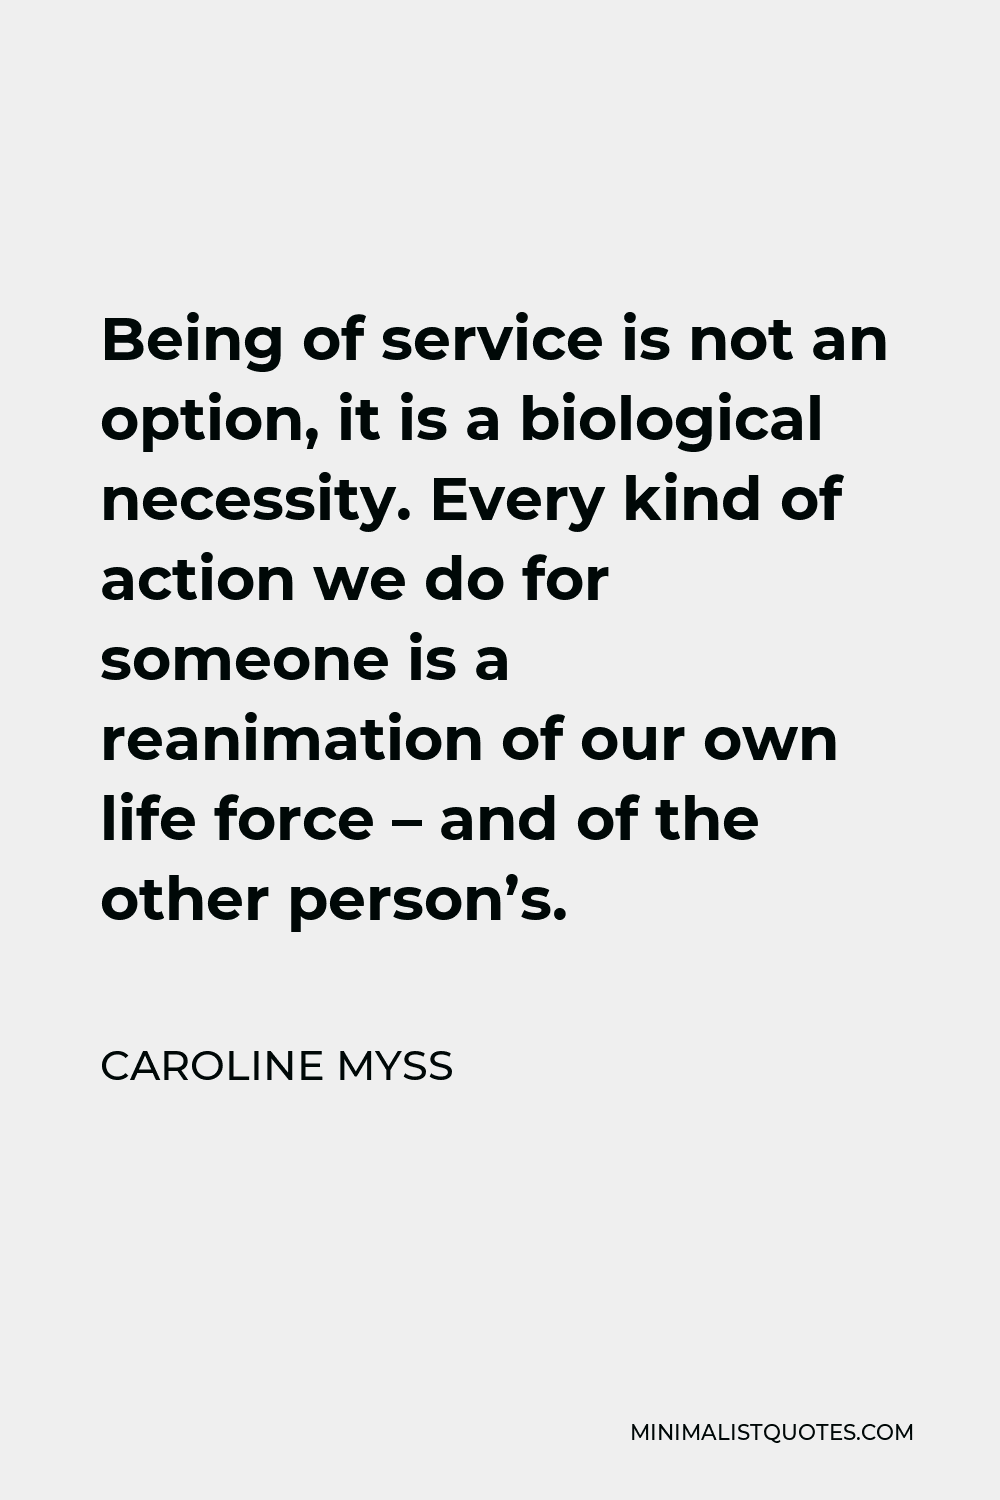 Caroline Myss Quote - Being of service is not an option, it is a biological necessity. Every kind of action we do for someone is a reanimation of our own life force – and of the other person’s.